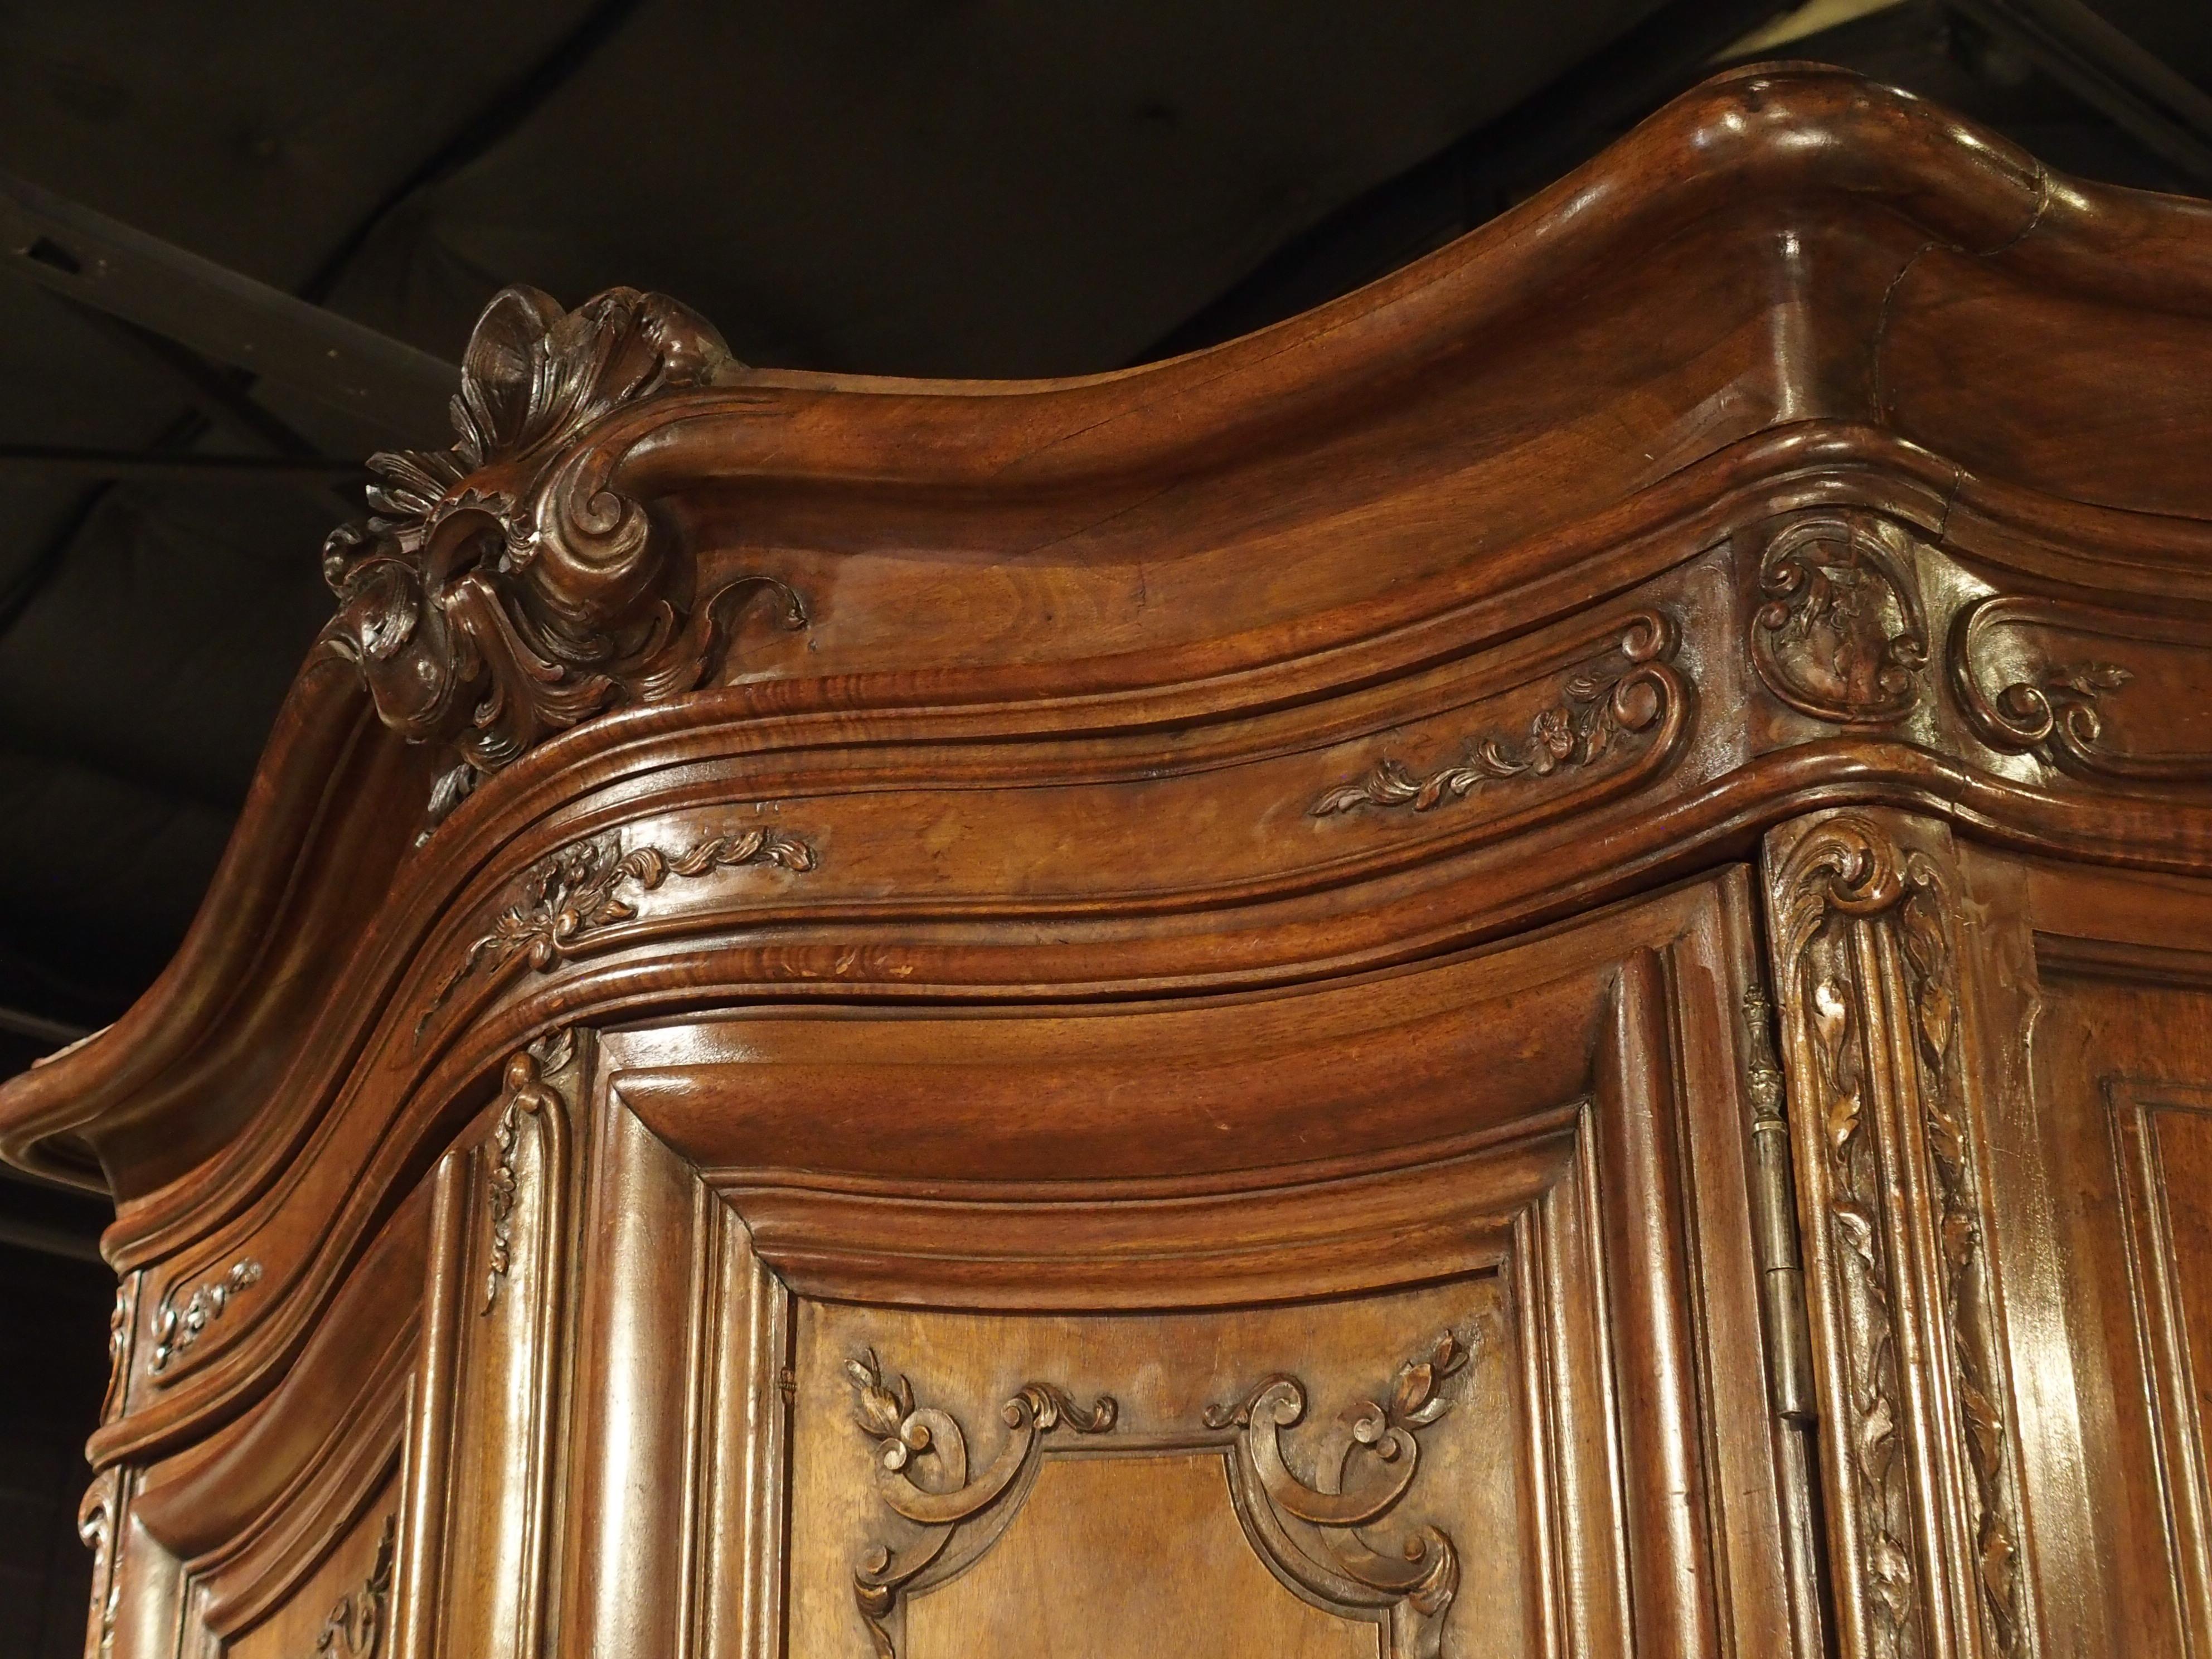 This impressive walnut buffet deux corps was produced in France during the 1800’s. The two-body buffet was hand-carved with bombe (convex) faces and is in the style of Regence. The Regence period occurred after the reign of Louis XIV, when France